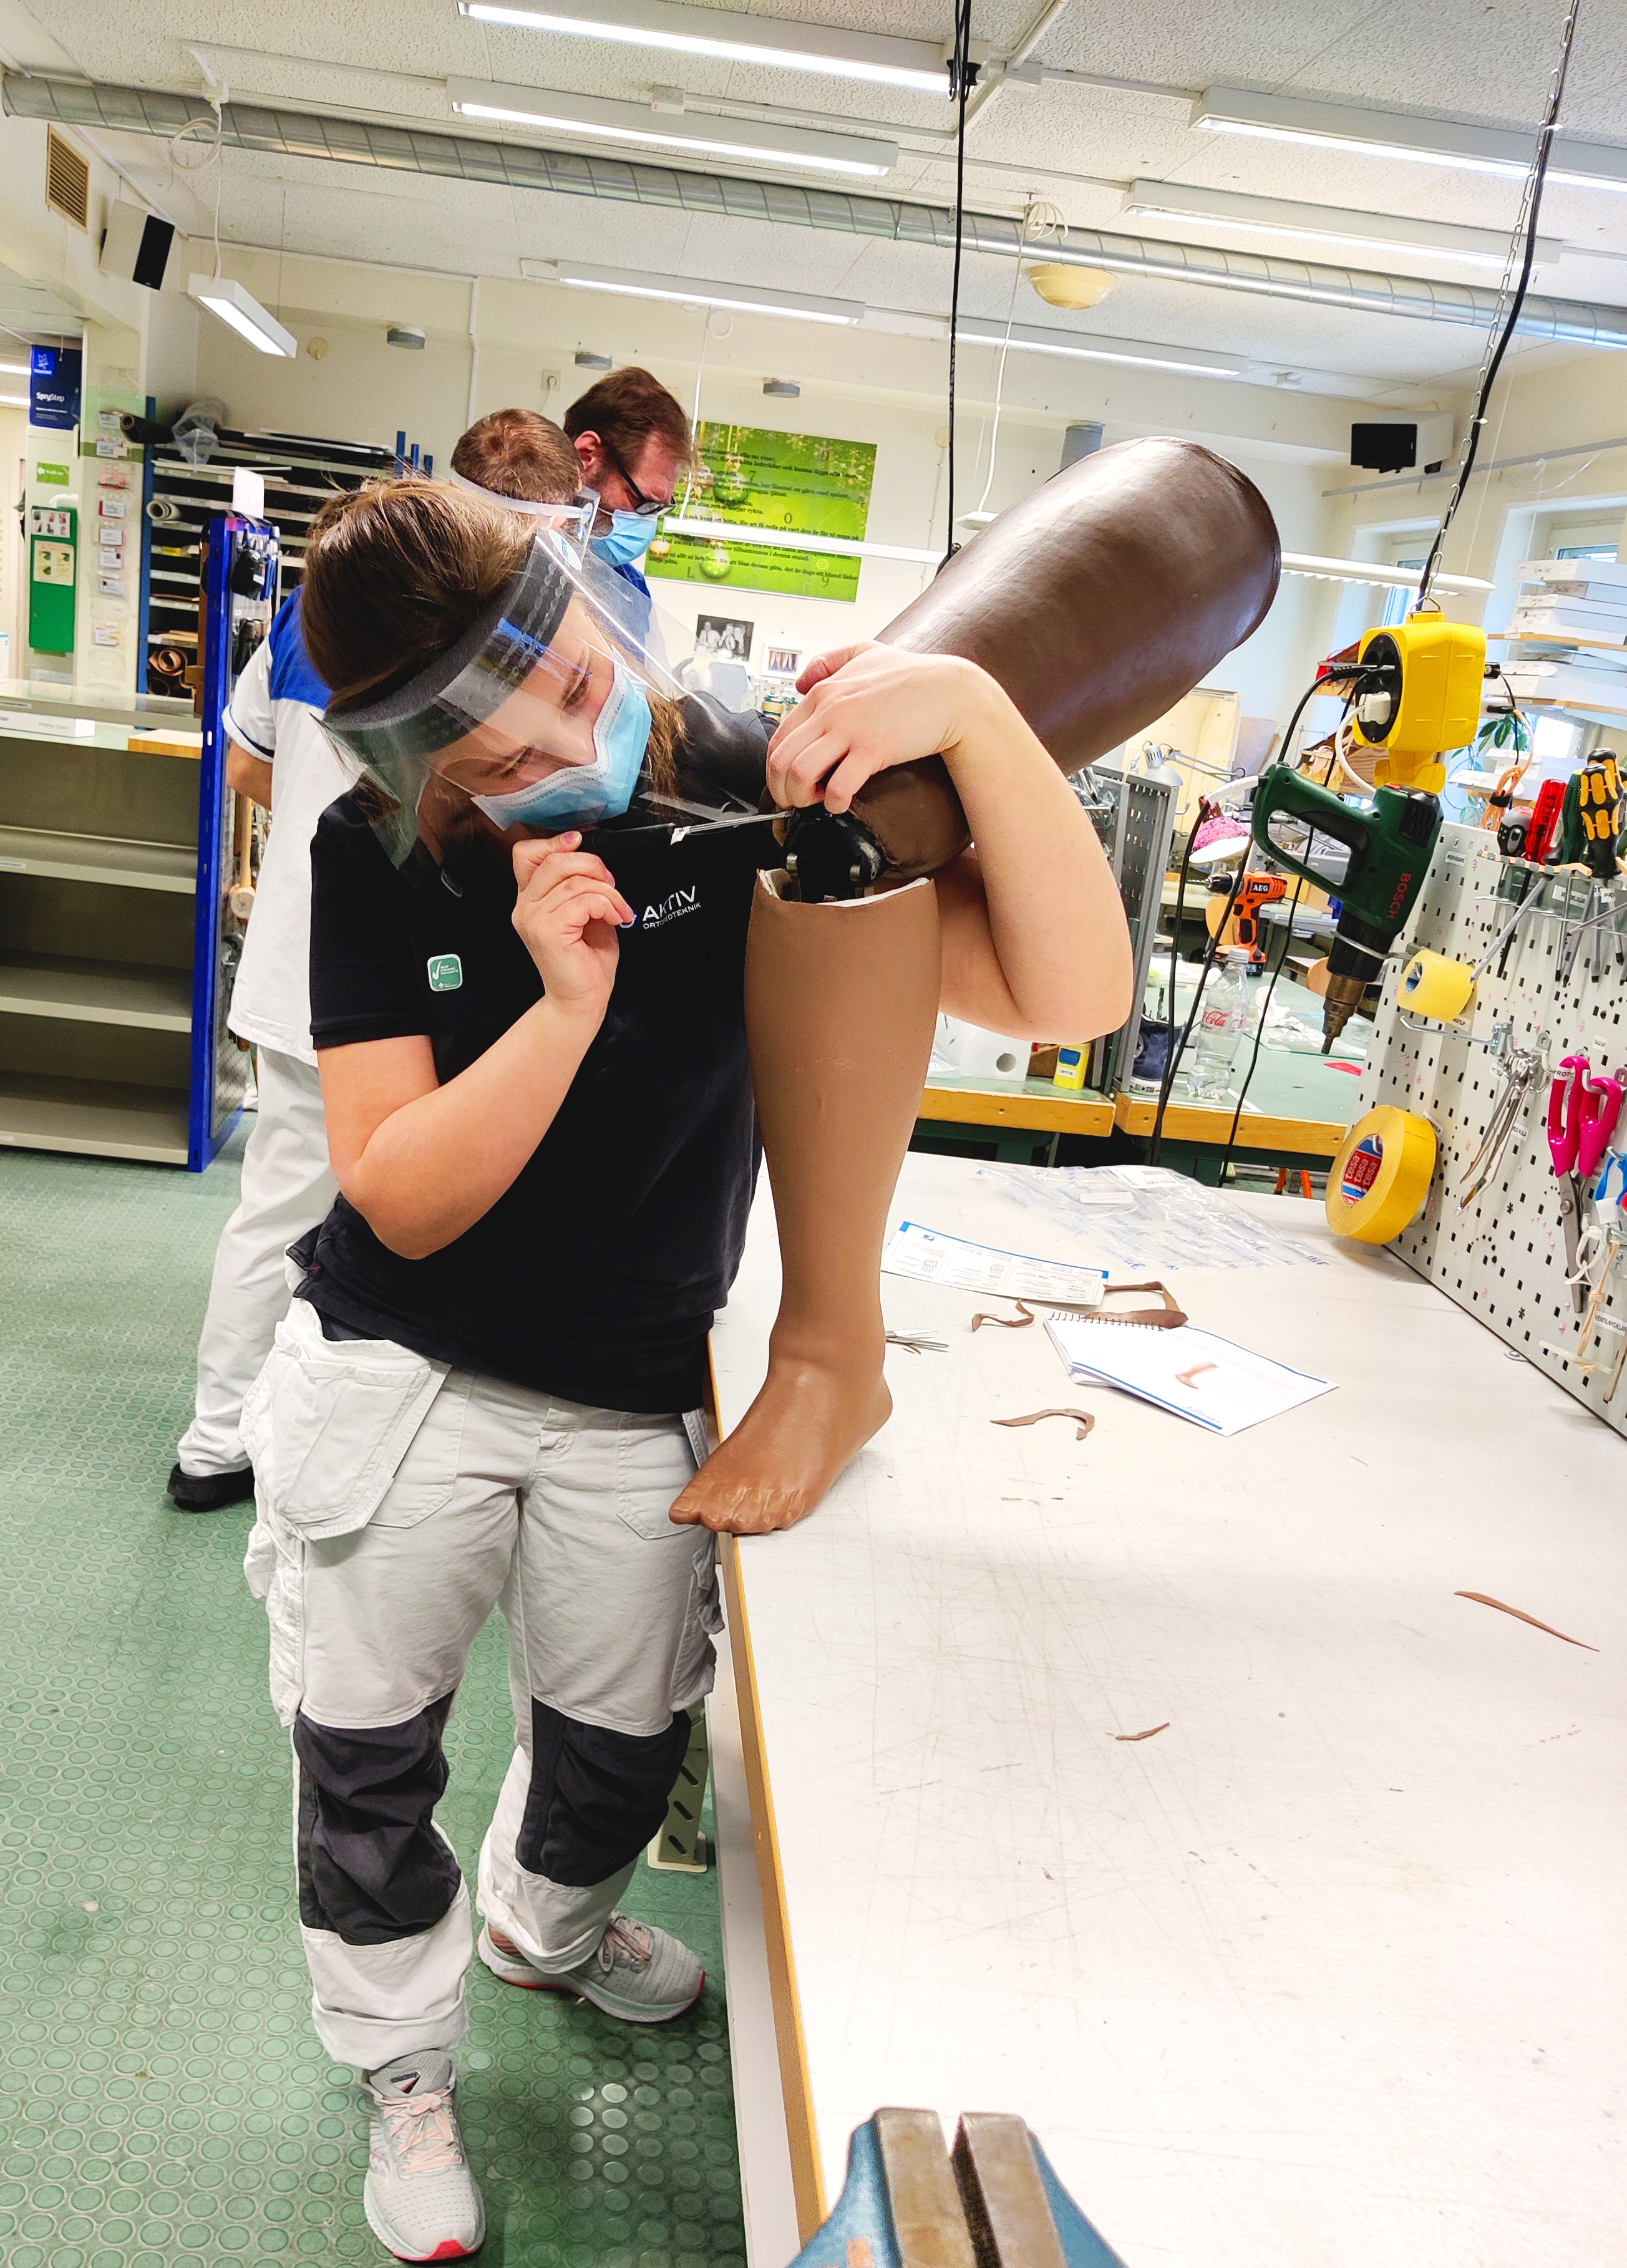 Woman with visir and face mask working on a knee prothesis in a workshop environment